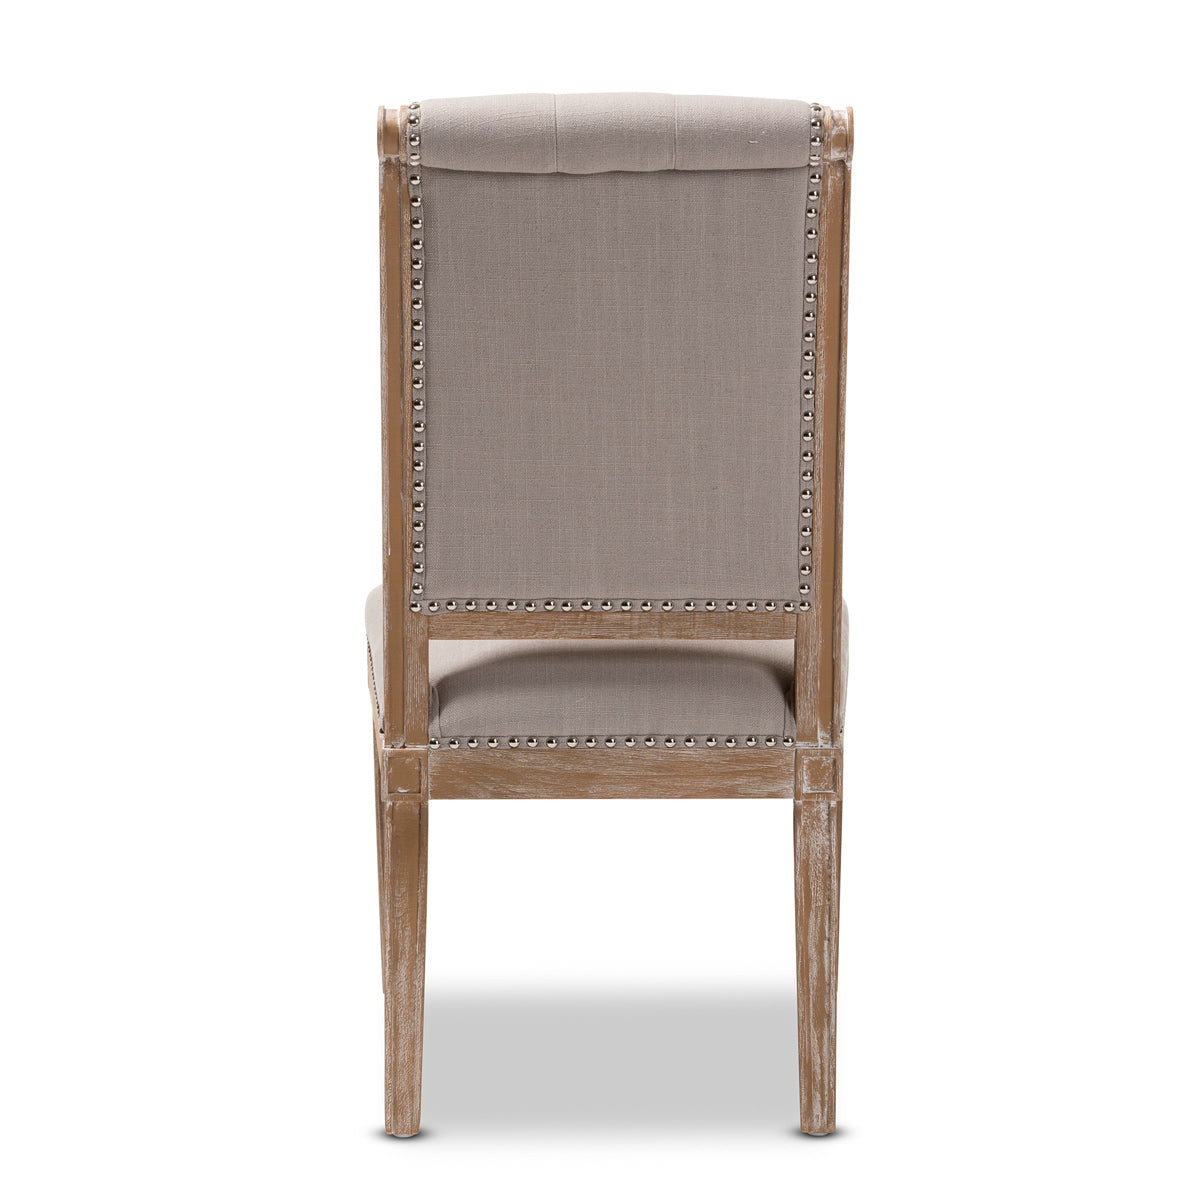 Baxton Studio Charmant French Provincial Beige Fabric Upholstered Weathered Oak Finished Wood Dining Chair Baxton Studio-dining chair-Minimal And Modern - 4